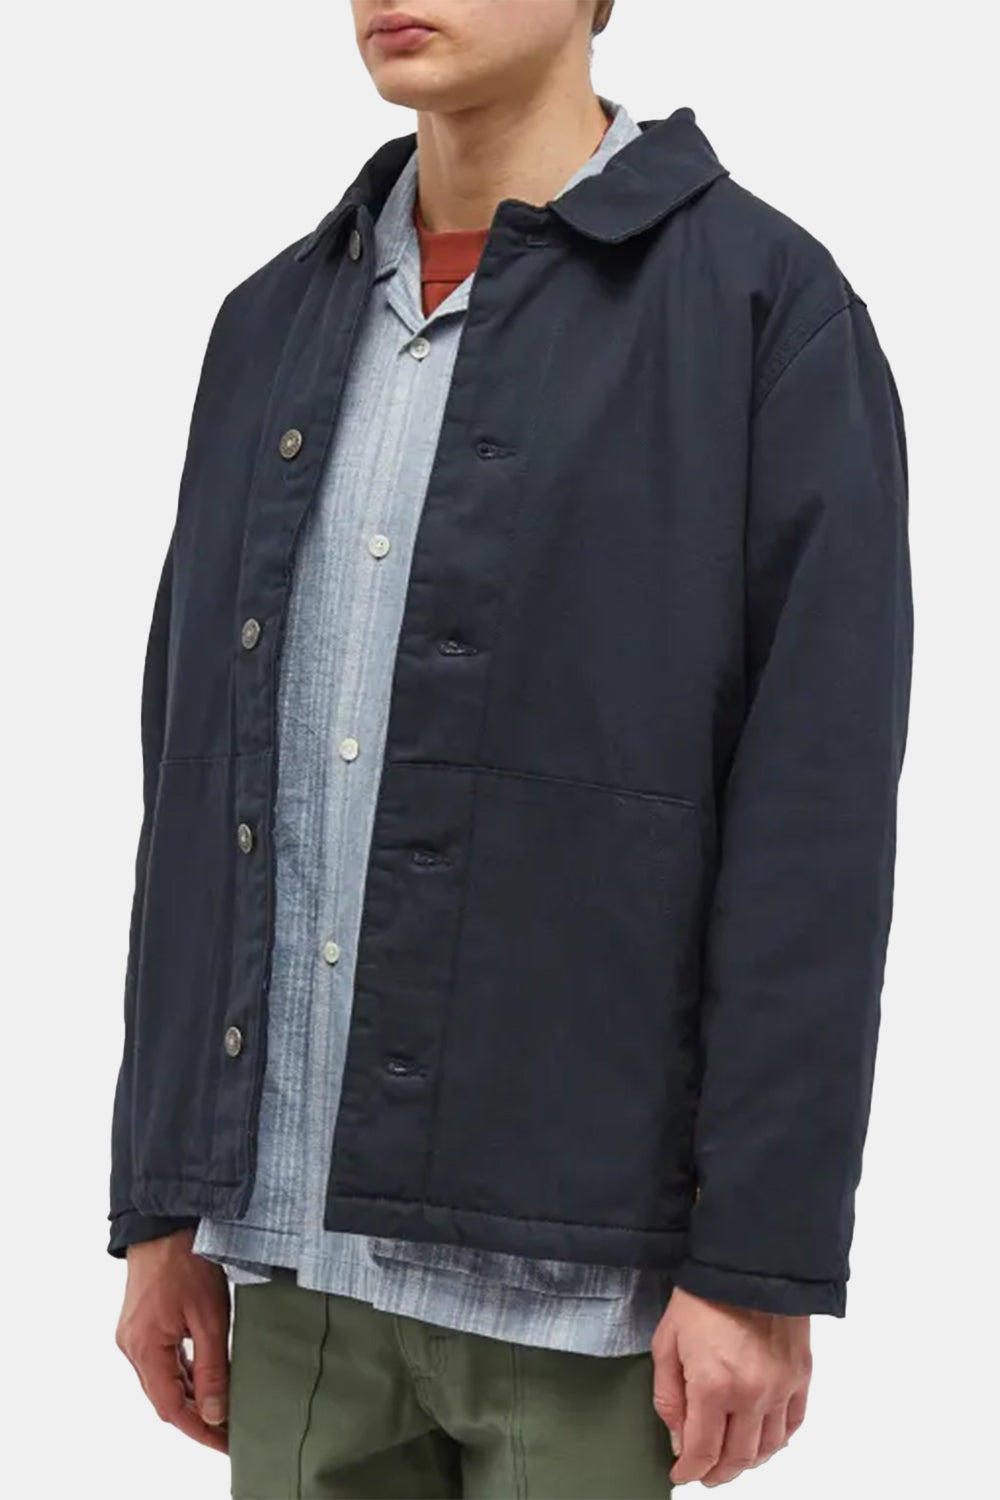 Armor Lux Fisherman's Jacket (Rich Navy)